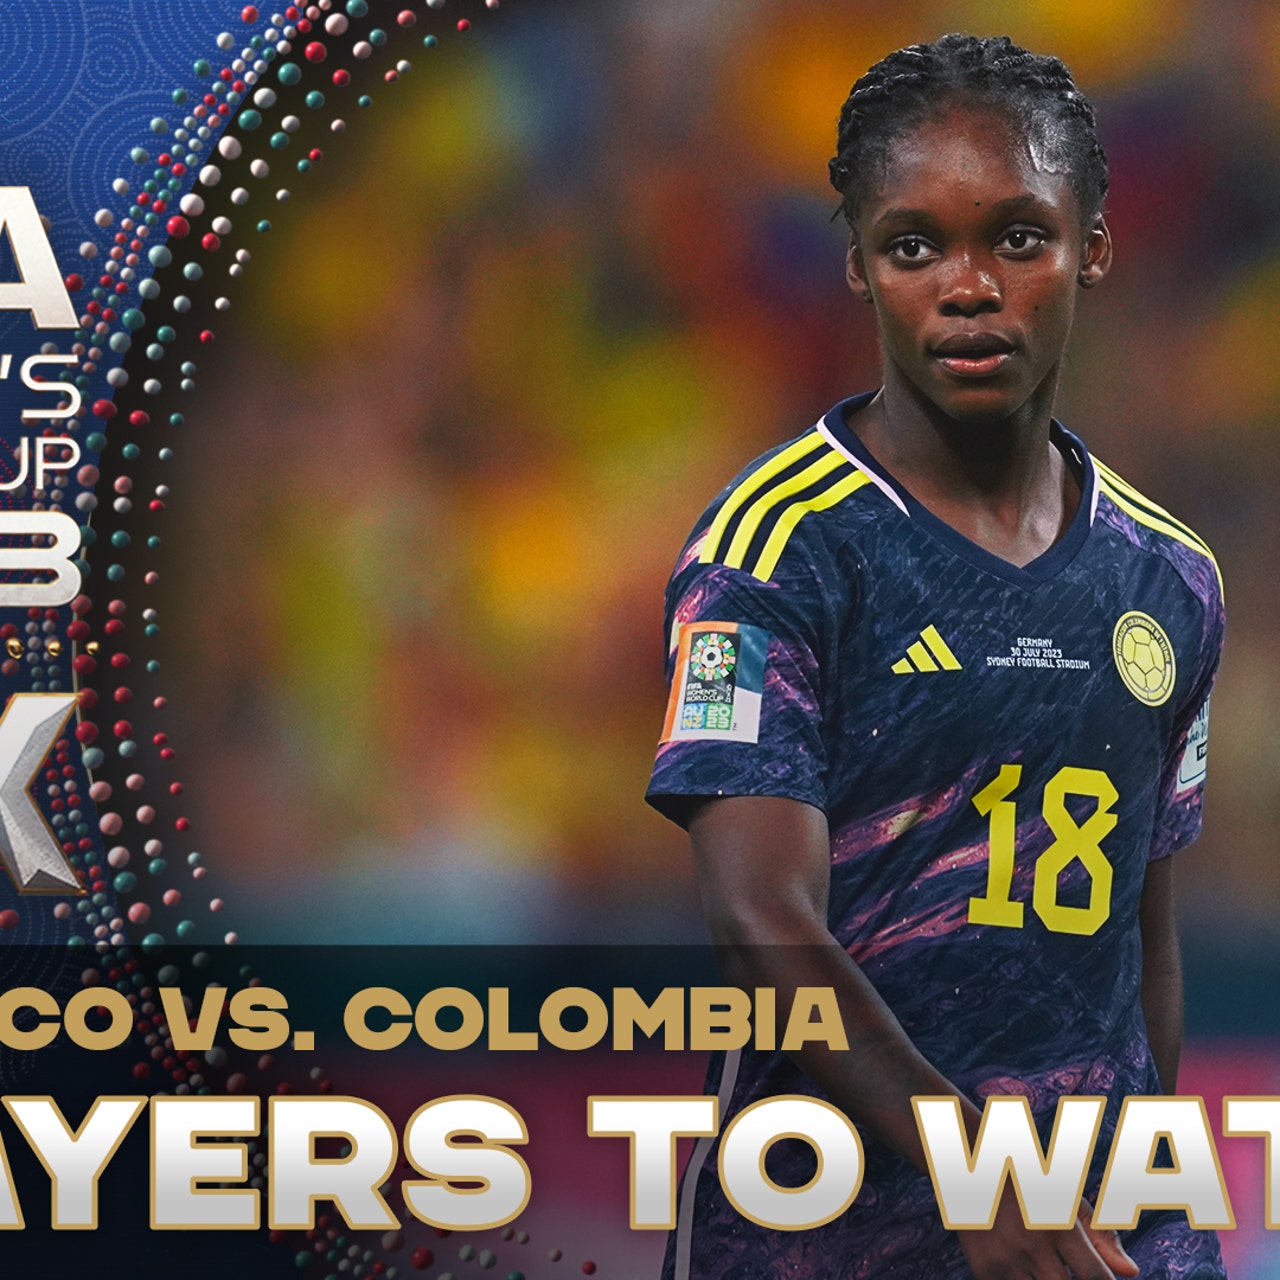 Linda Caicedo leads players to watch for Morocco vs